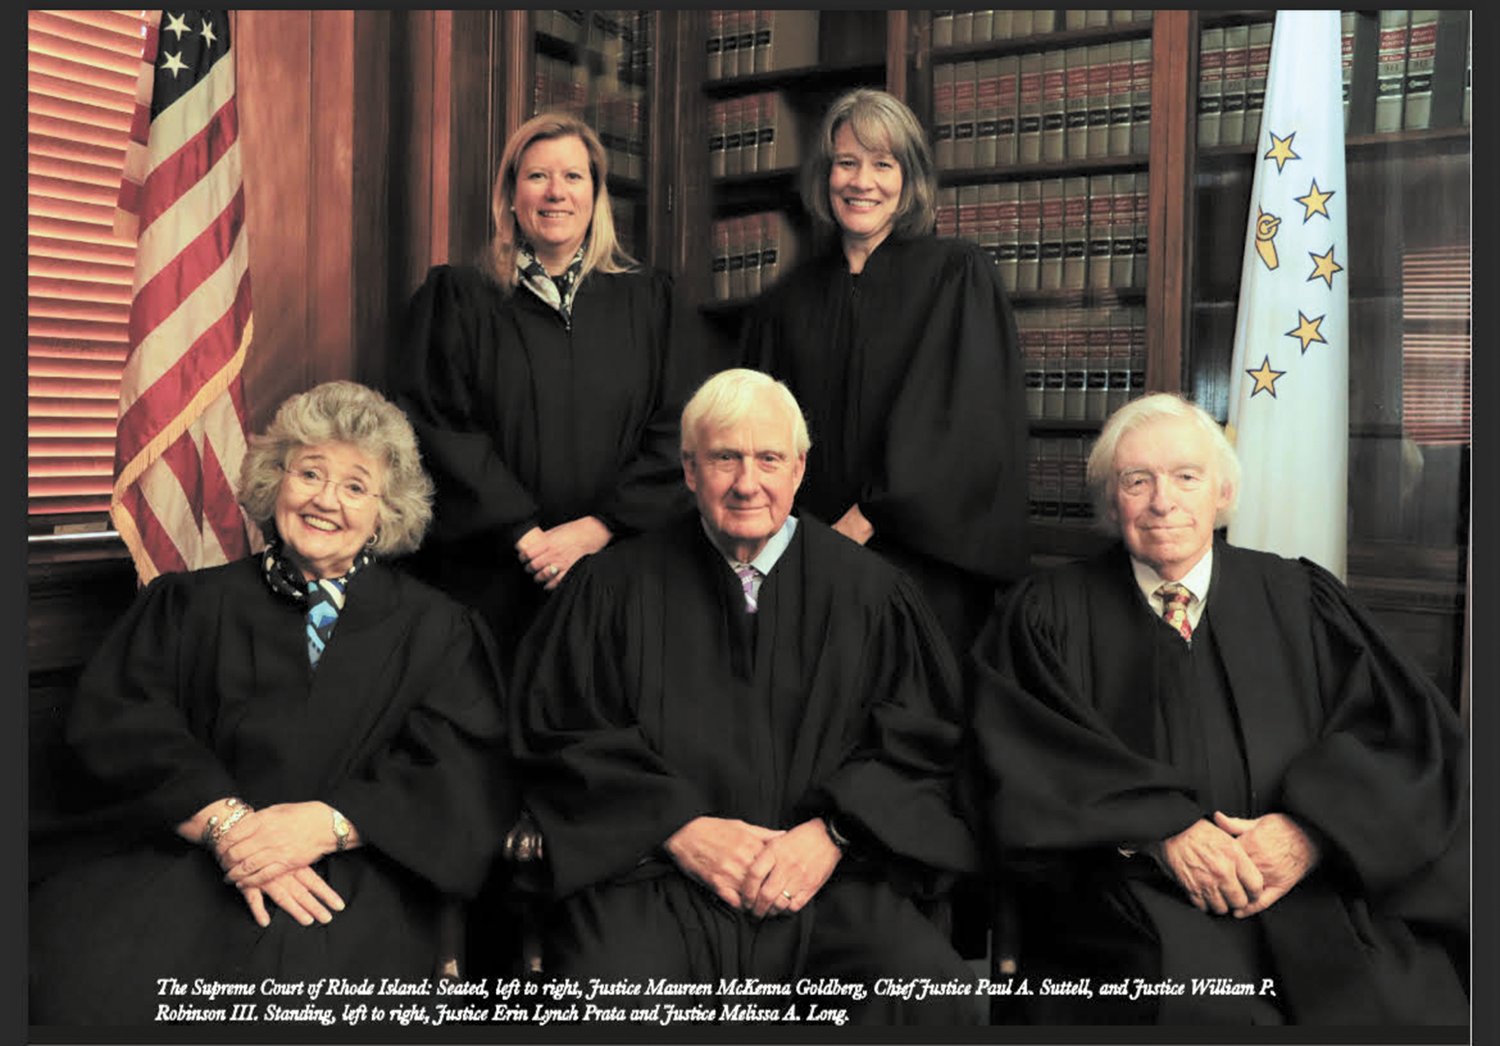 THE FULL BENCH: Rhode Island Supreme Court justices from left seated are: Maureen McKenna Goldberg, Chief Justice Paul A. Suttell and William P. Robinson III and standing Erin Lynch Prata and Melissa A. Long.